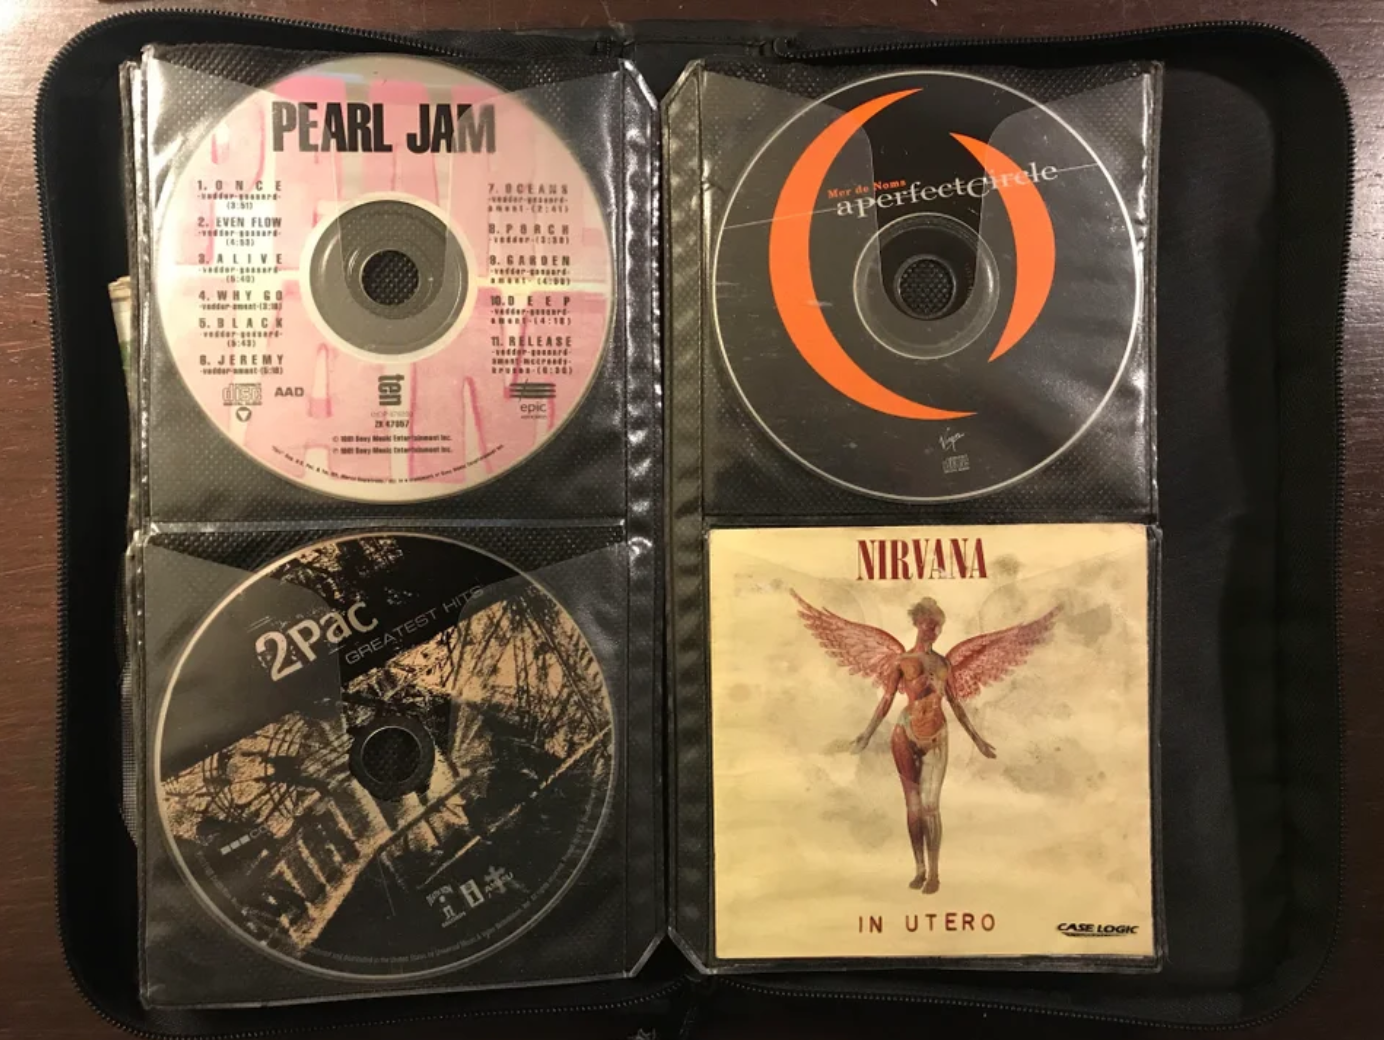 Book of since. CD XX, the i see you CD. Картинки 90 х годов. Even Flow Pearl Jam. Warlock CD booklet.